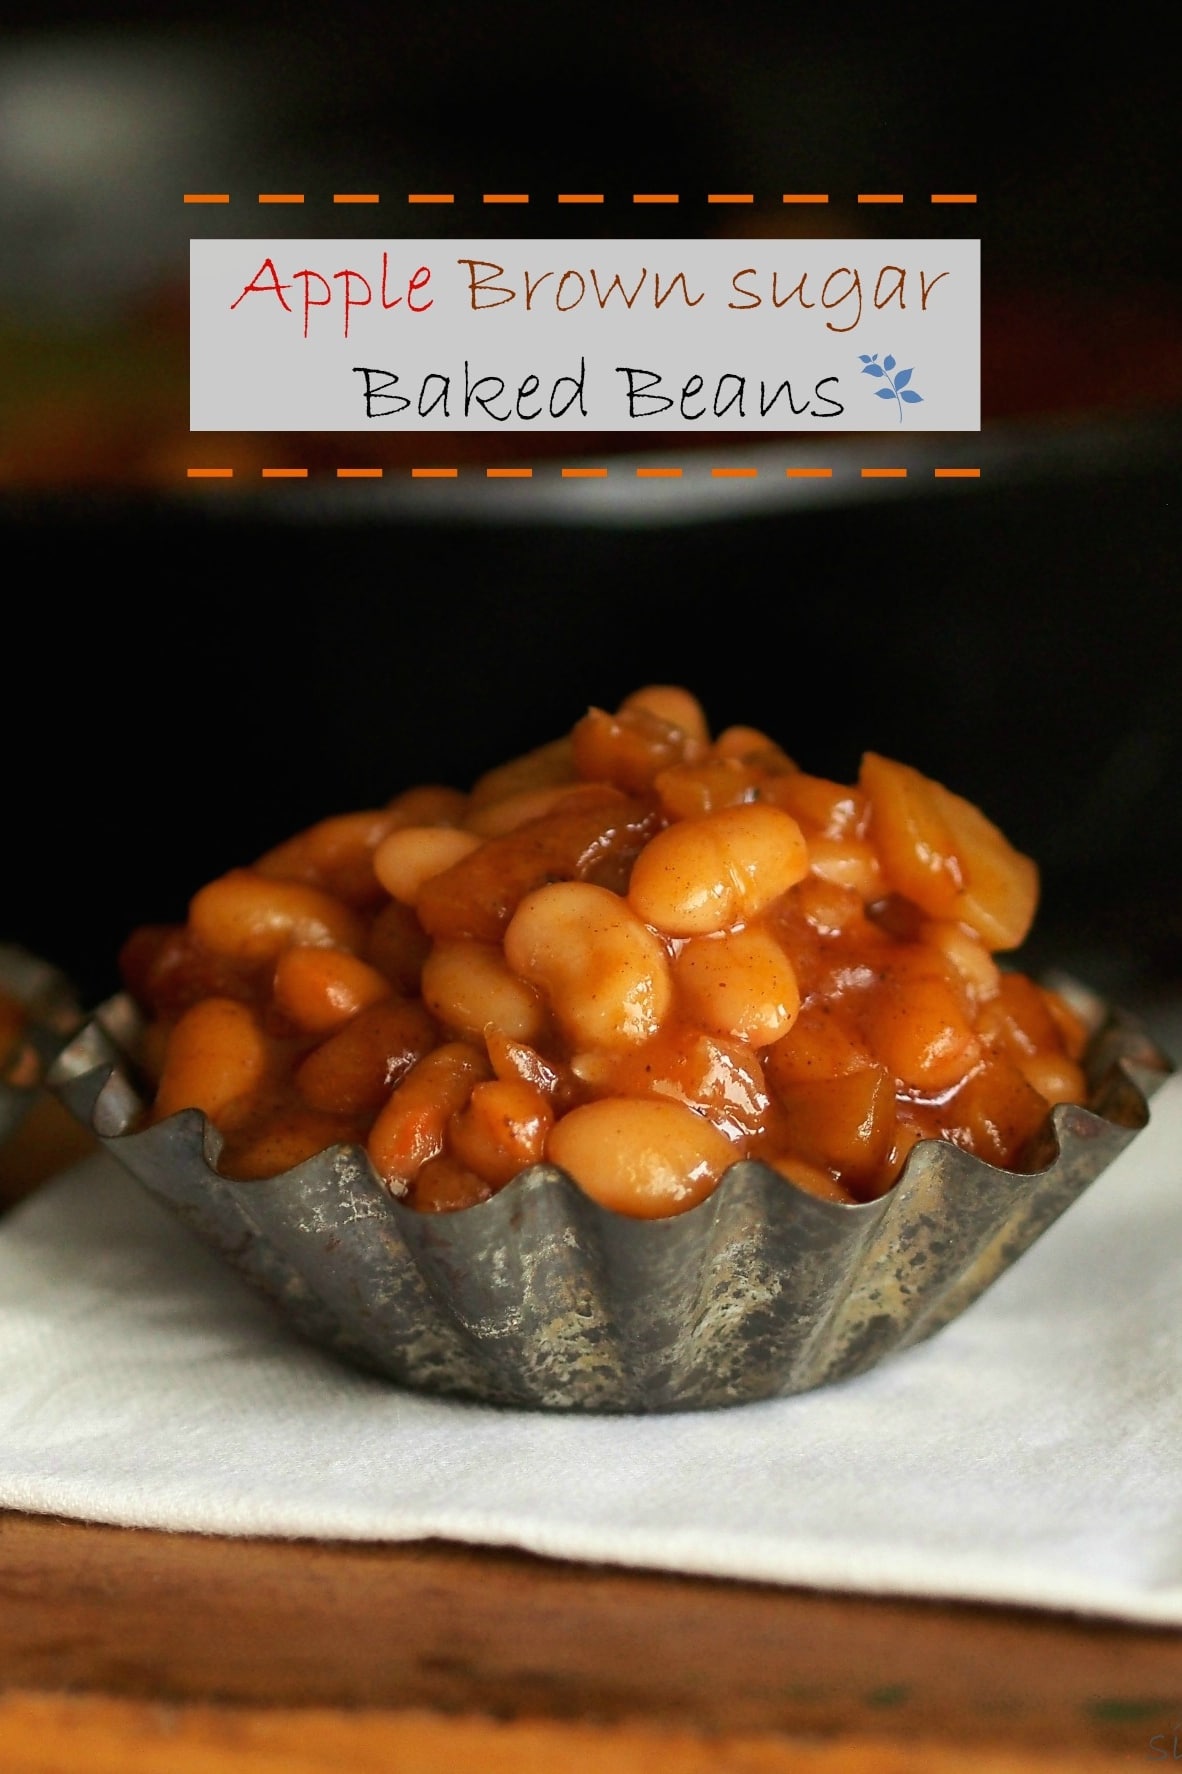 Apple Brown Sugar Baked Beans are one of the best two baked beans recipes - ever! simplysated